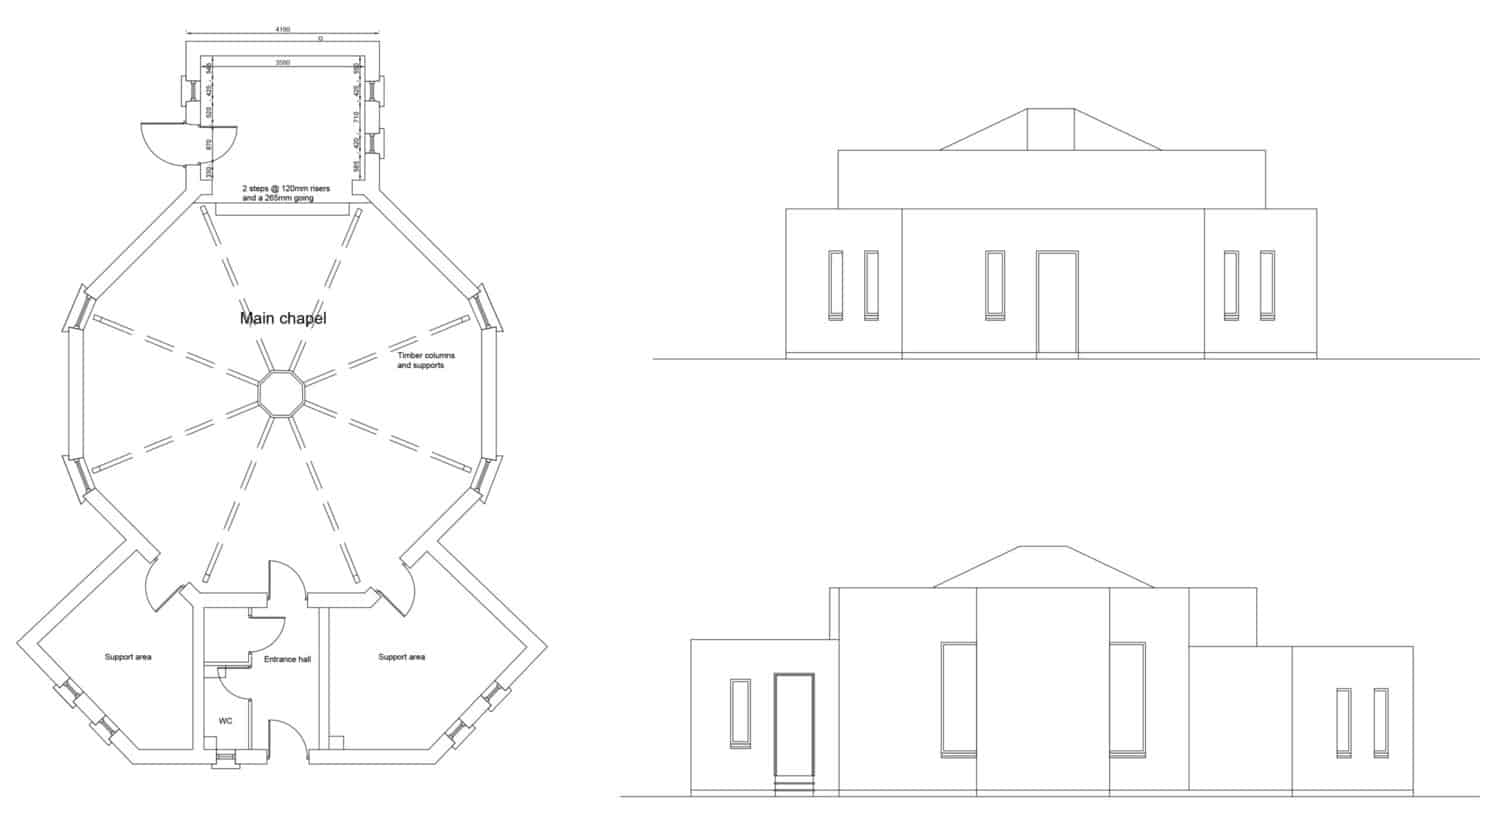 Plan and Elevations of Chapel. Archive of Steve Jensen Design